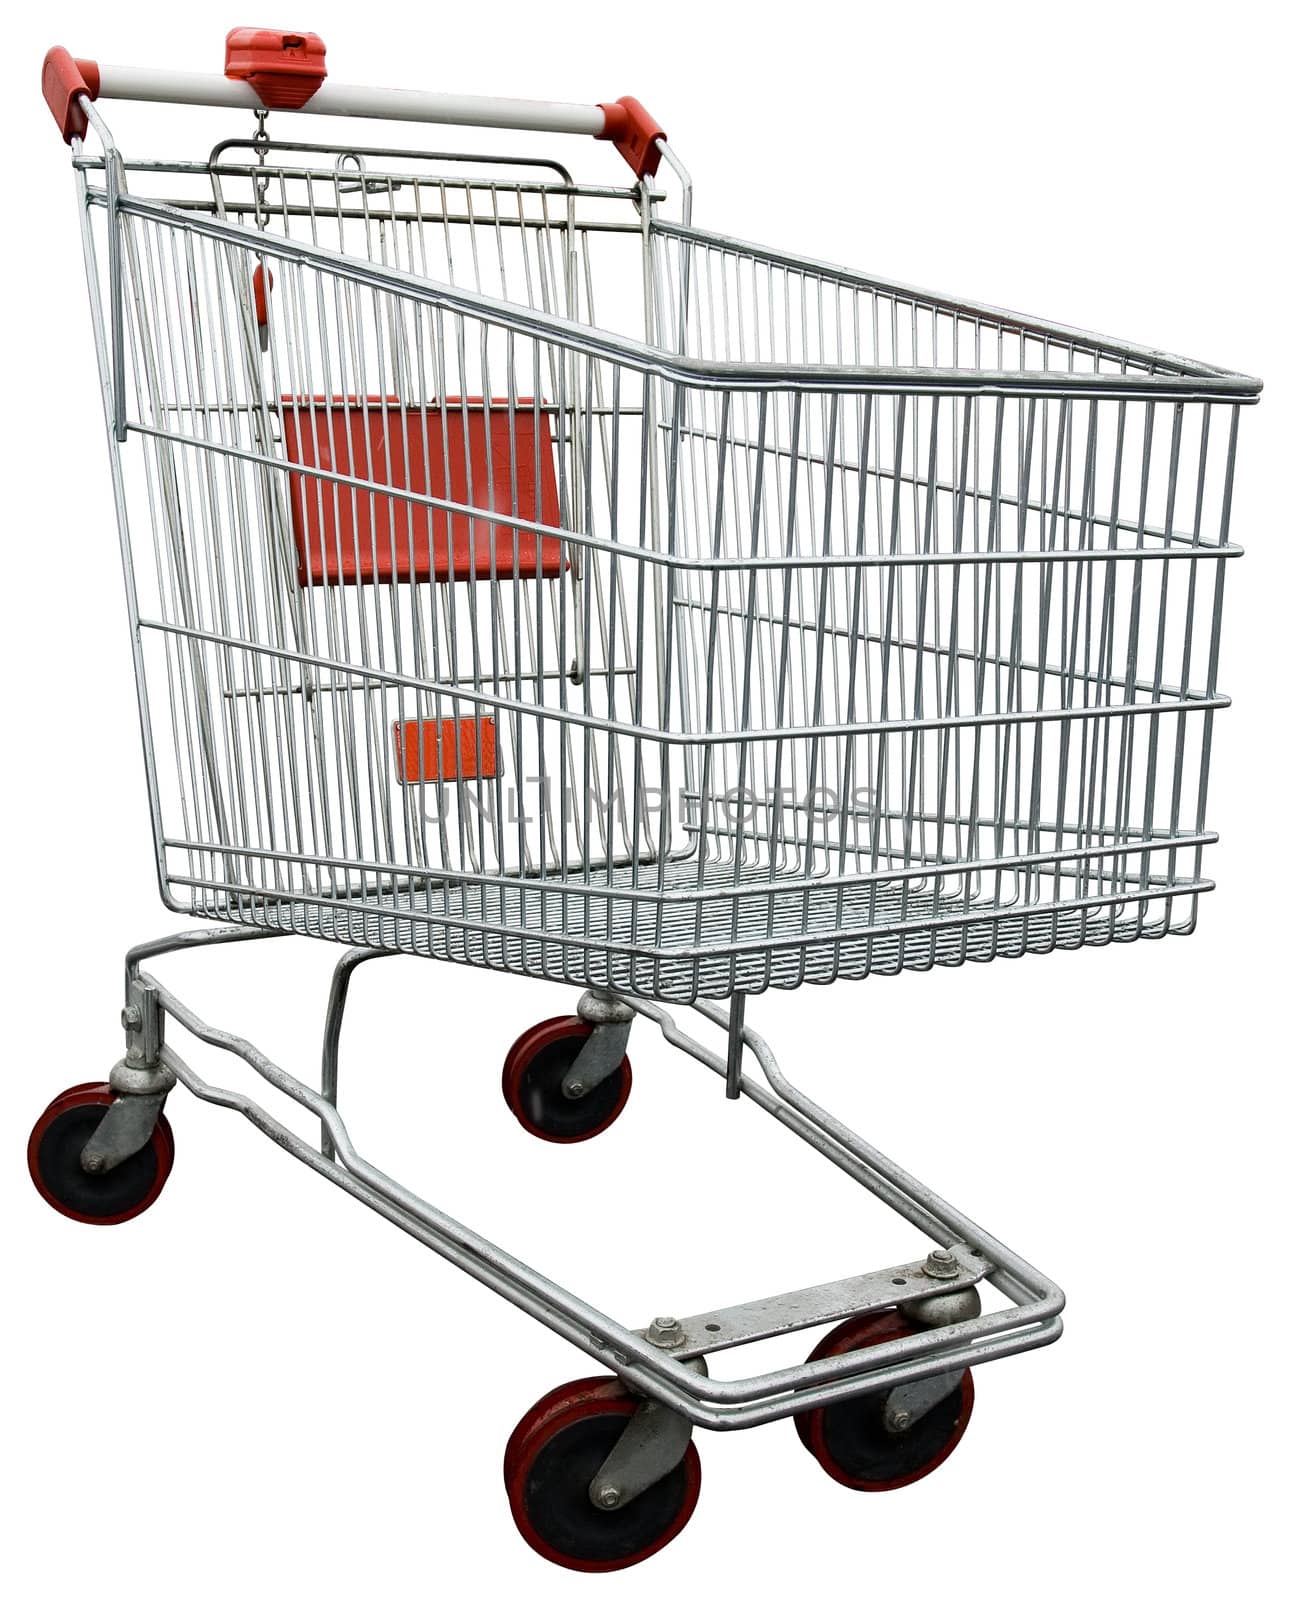 Shopping cart with clipping path by ints